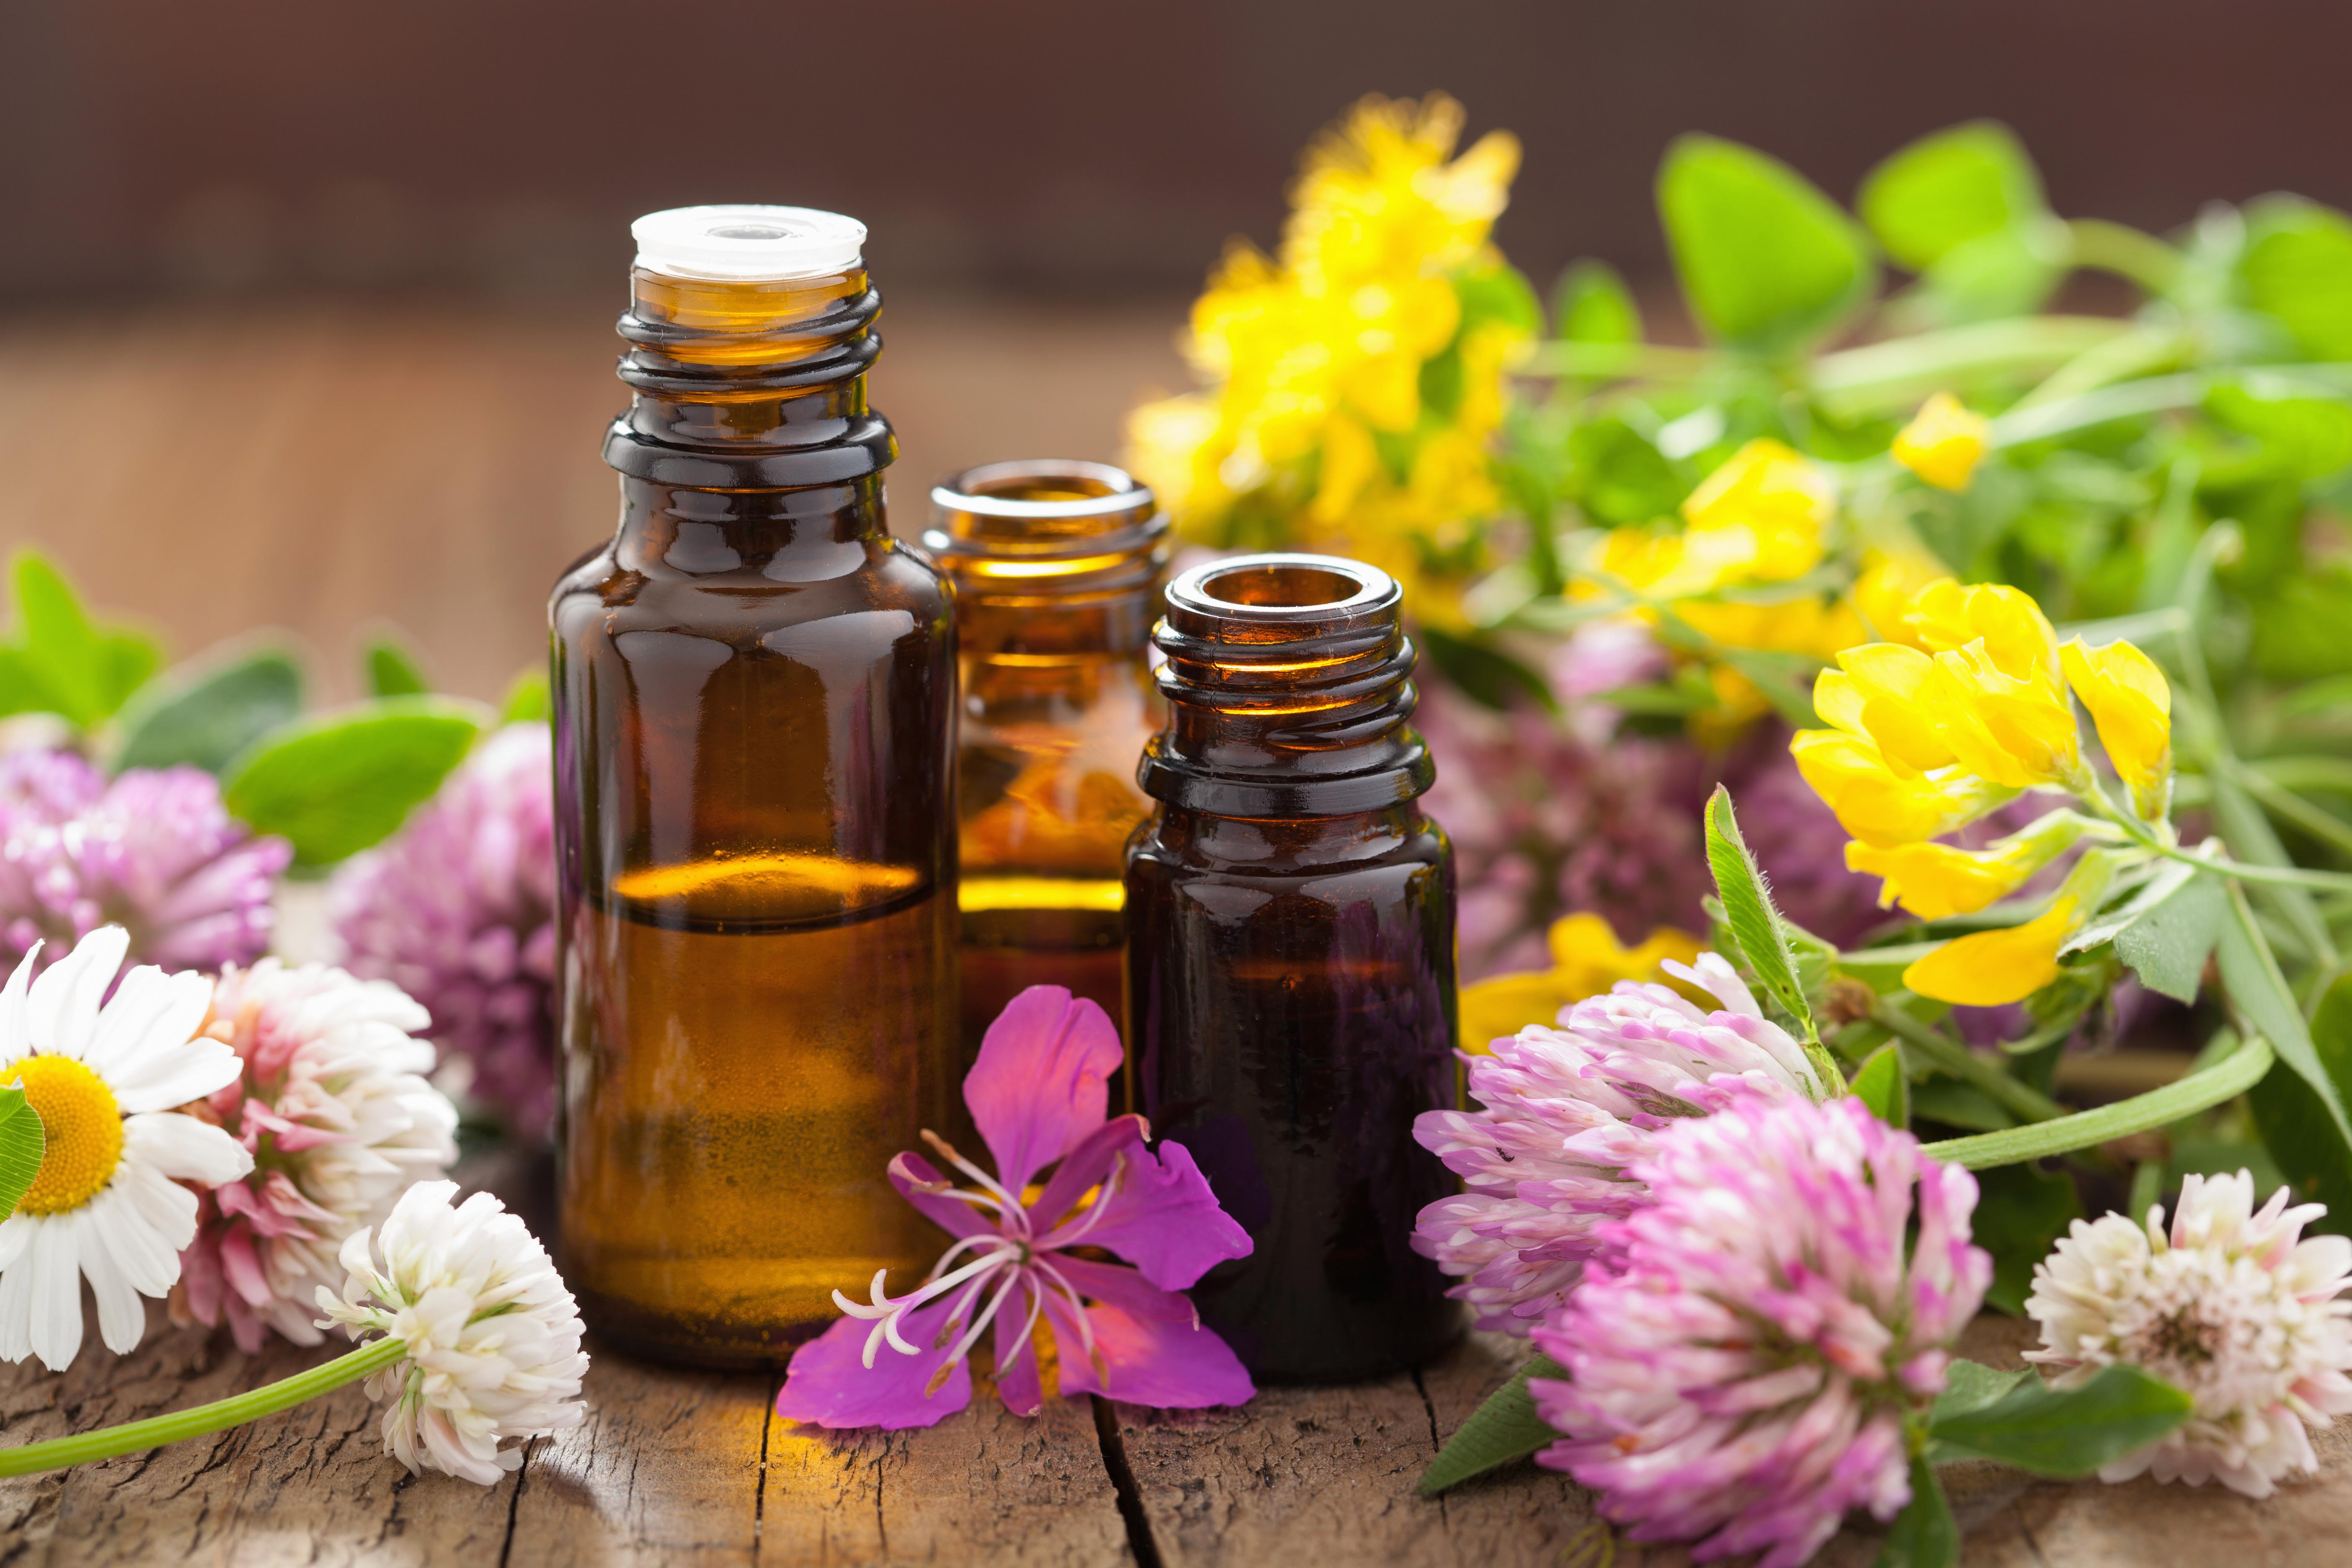 Getting Started with Essential Oils - Torrance